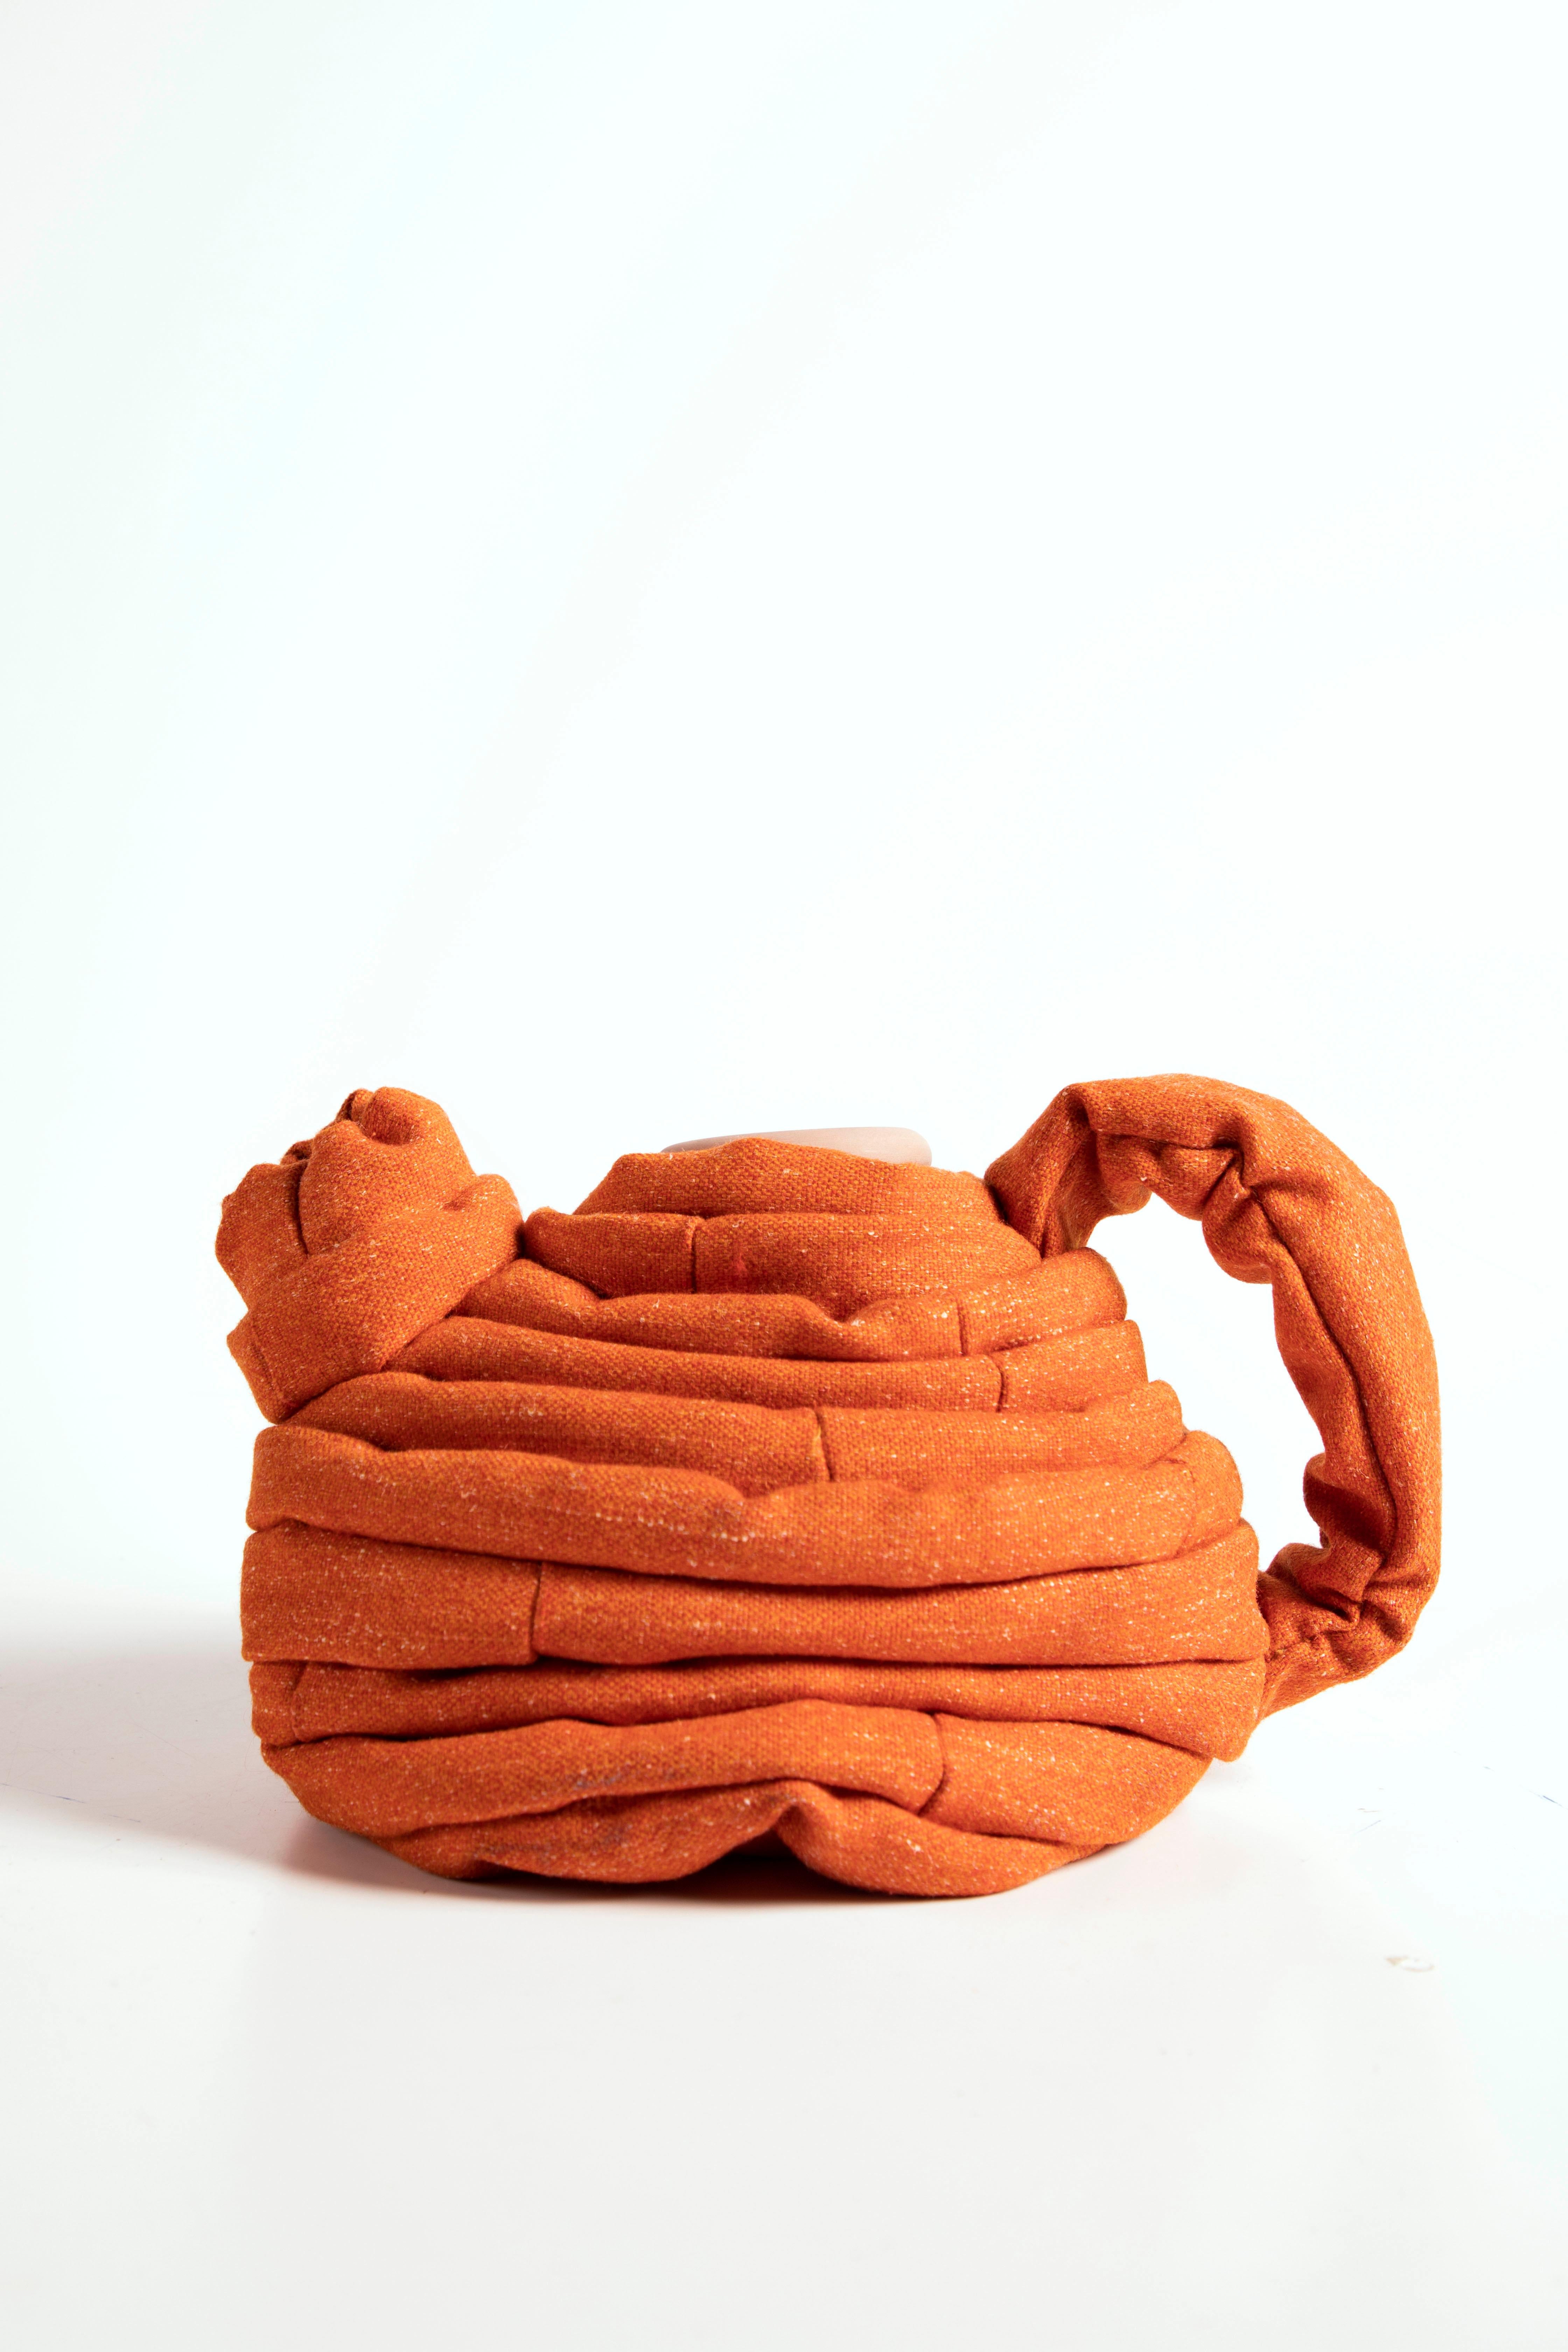 Plakkenpot E coffee pot by Hanna Kooistra
Dimensions: 23 x 25 cm
Materials: ceramics, wool.

These coffee pots are a reinterpretation of a coffee pot from the Rijksmuseum. The view of this pre-industrial object transform trough a dynamic design